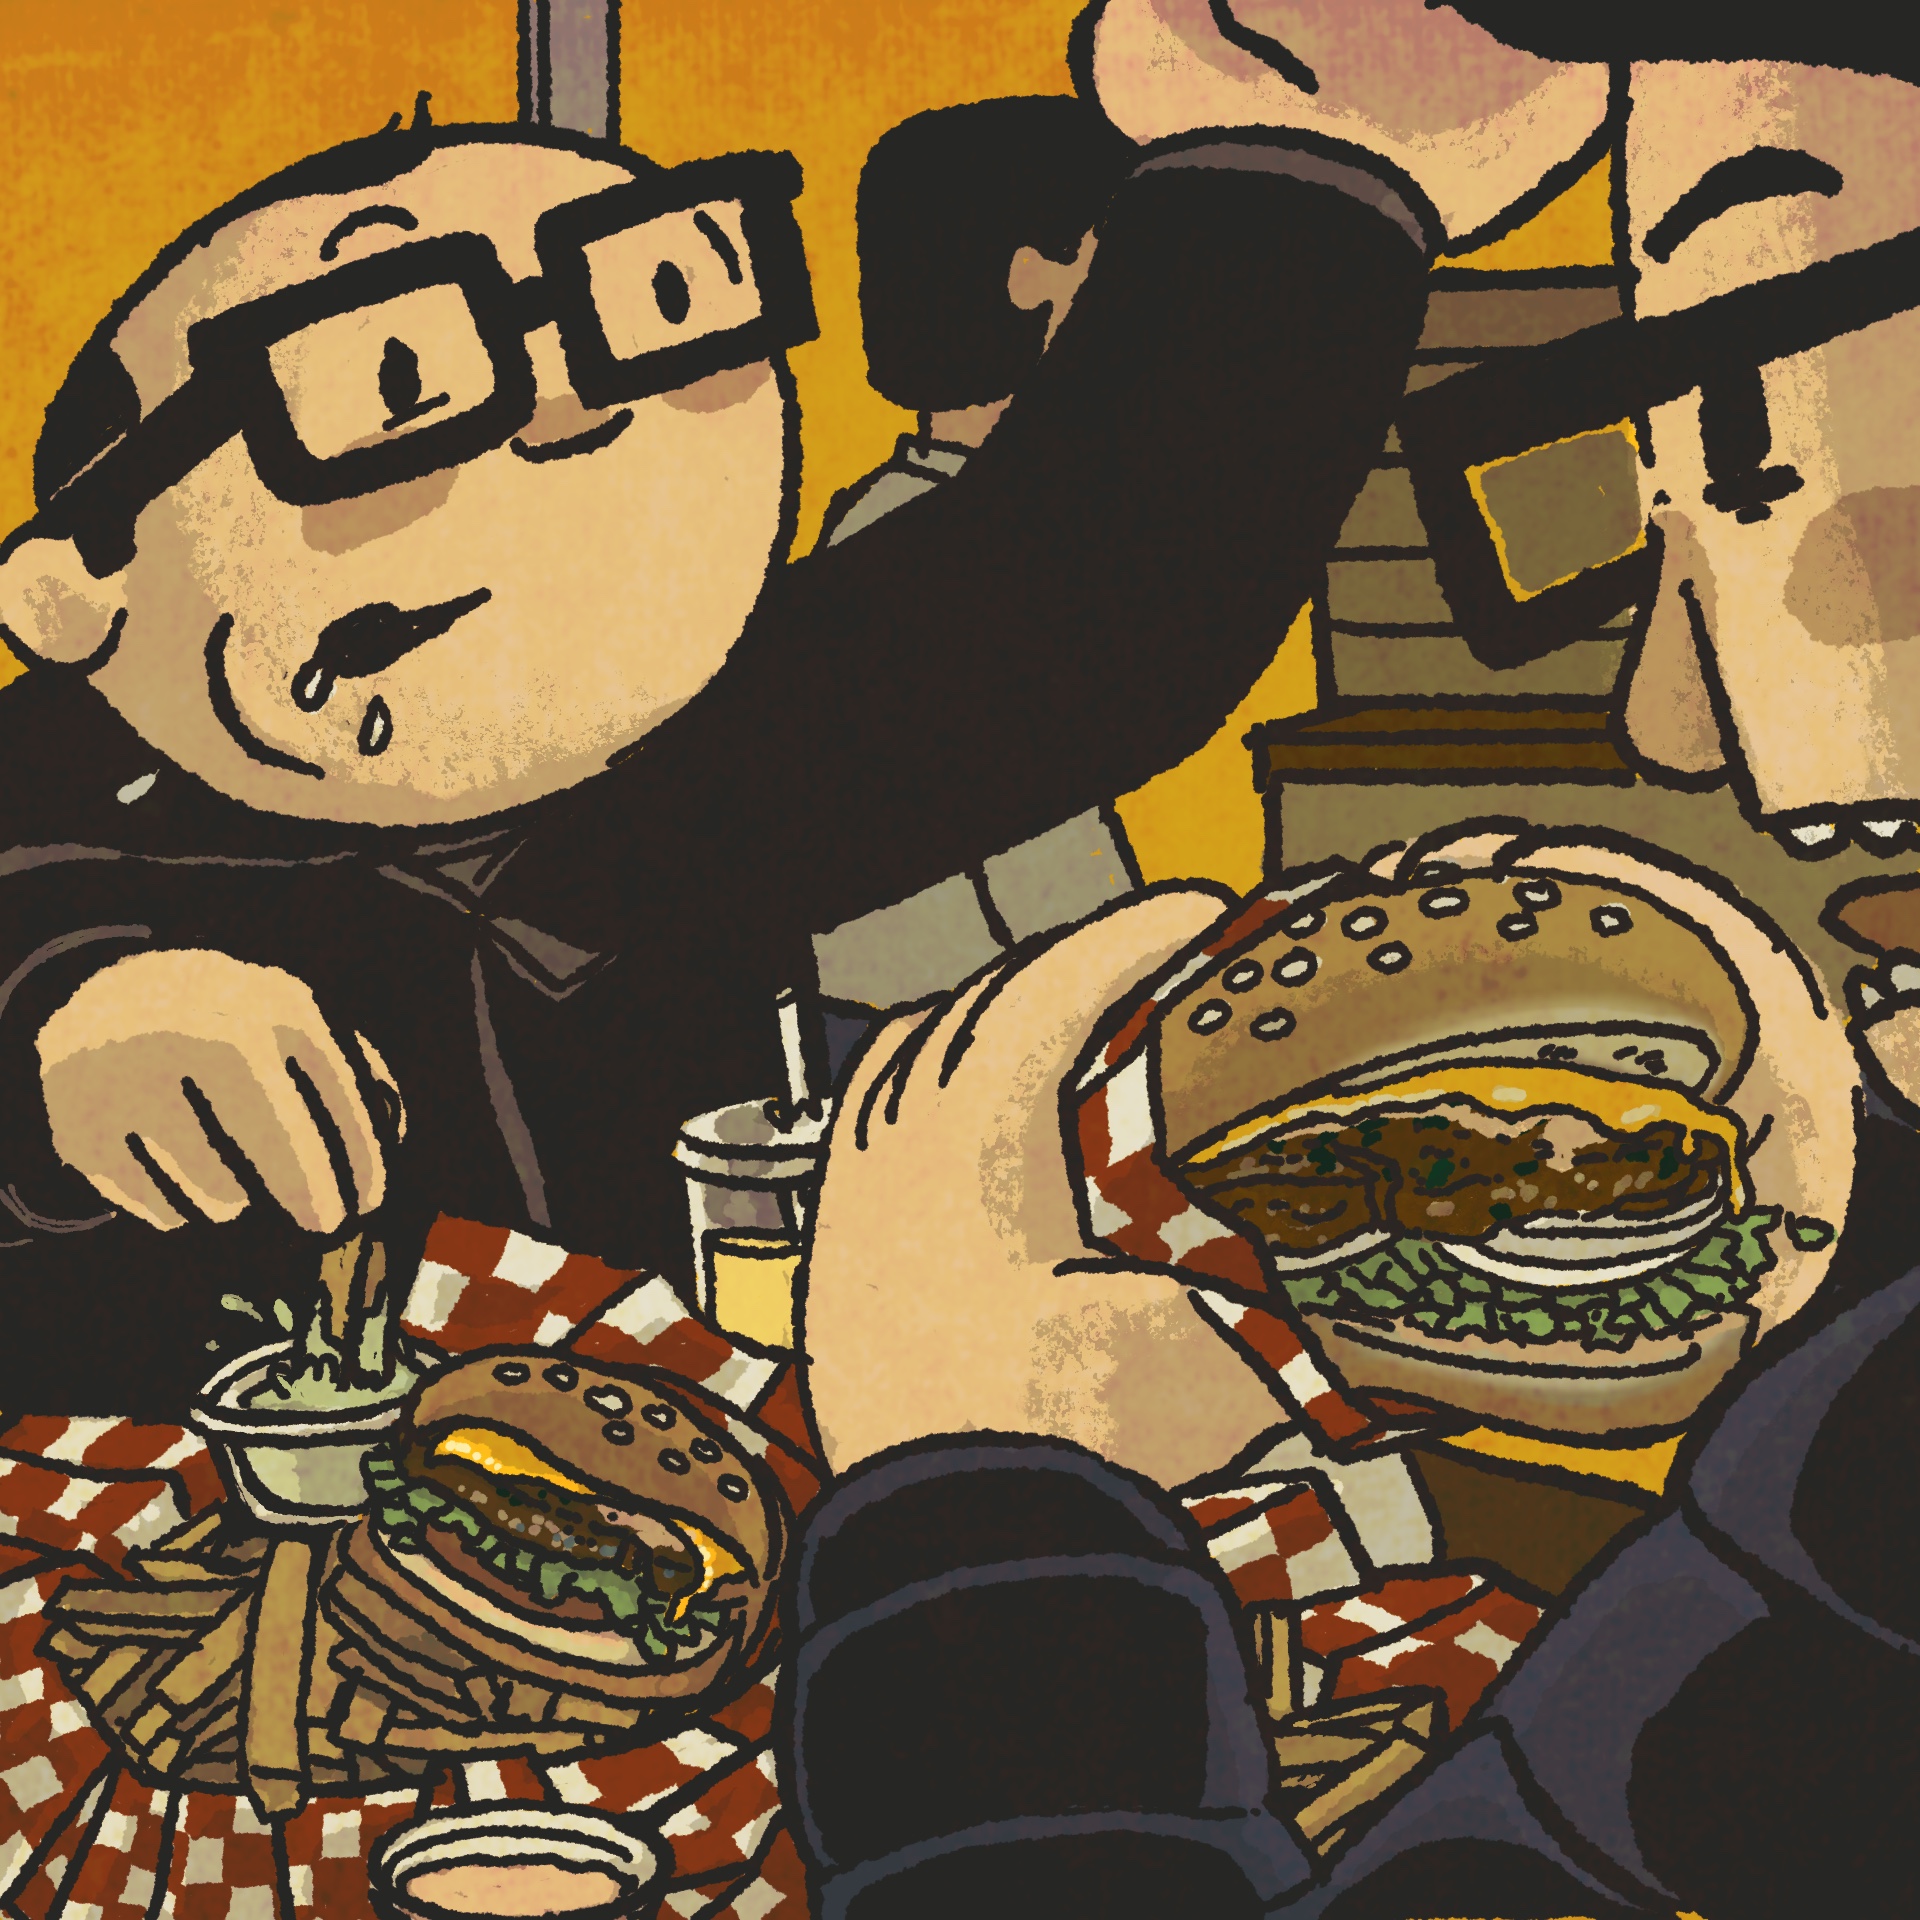 Two men in glasses look ravenously hungry as they dig into a burgers and fries.